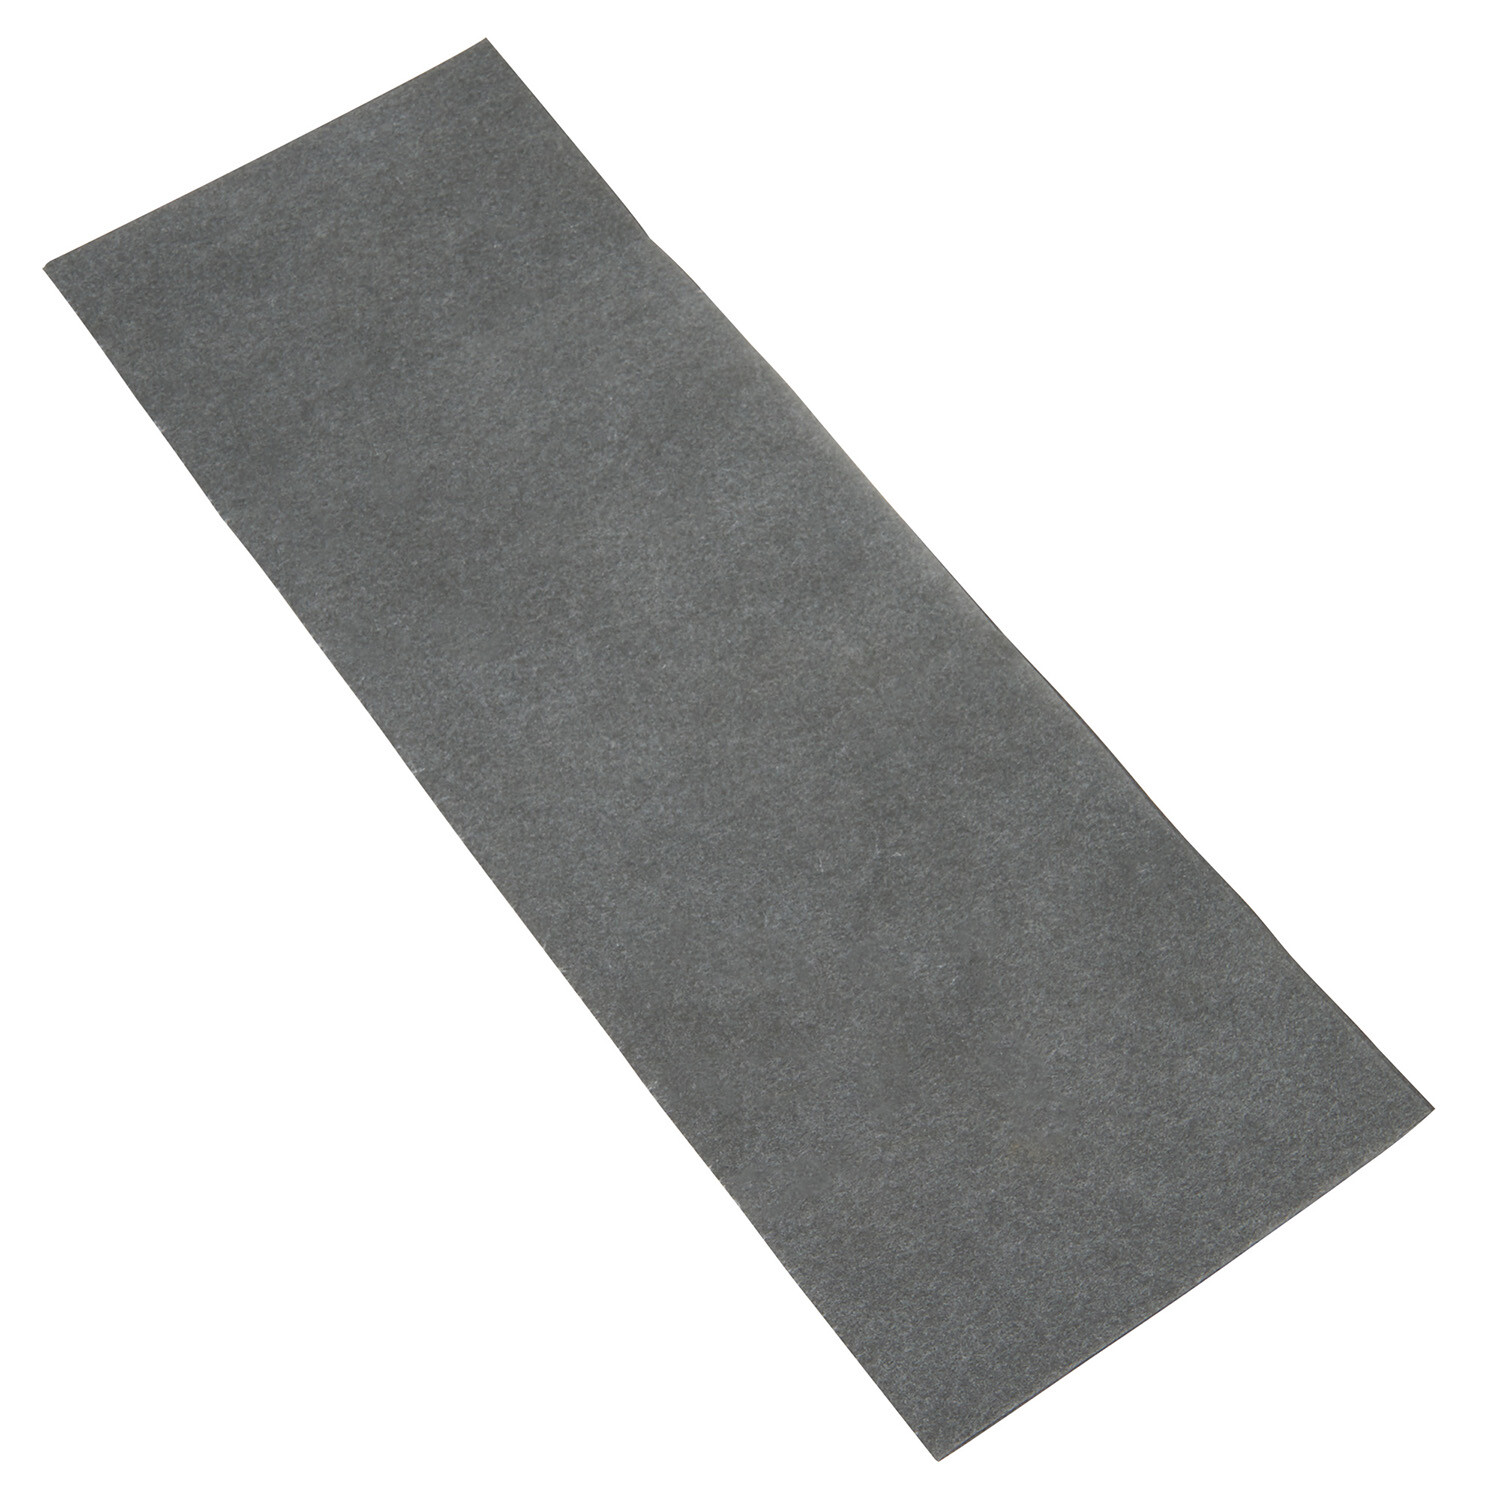 Pack of 4 Graphite Paper Sheets Image 1